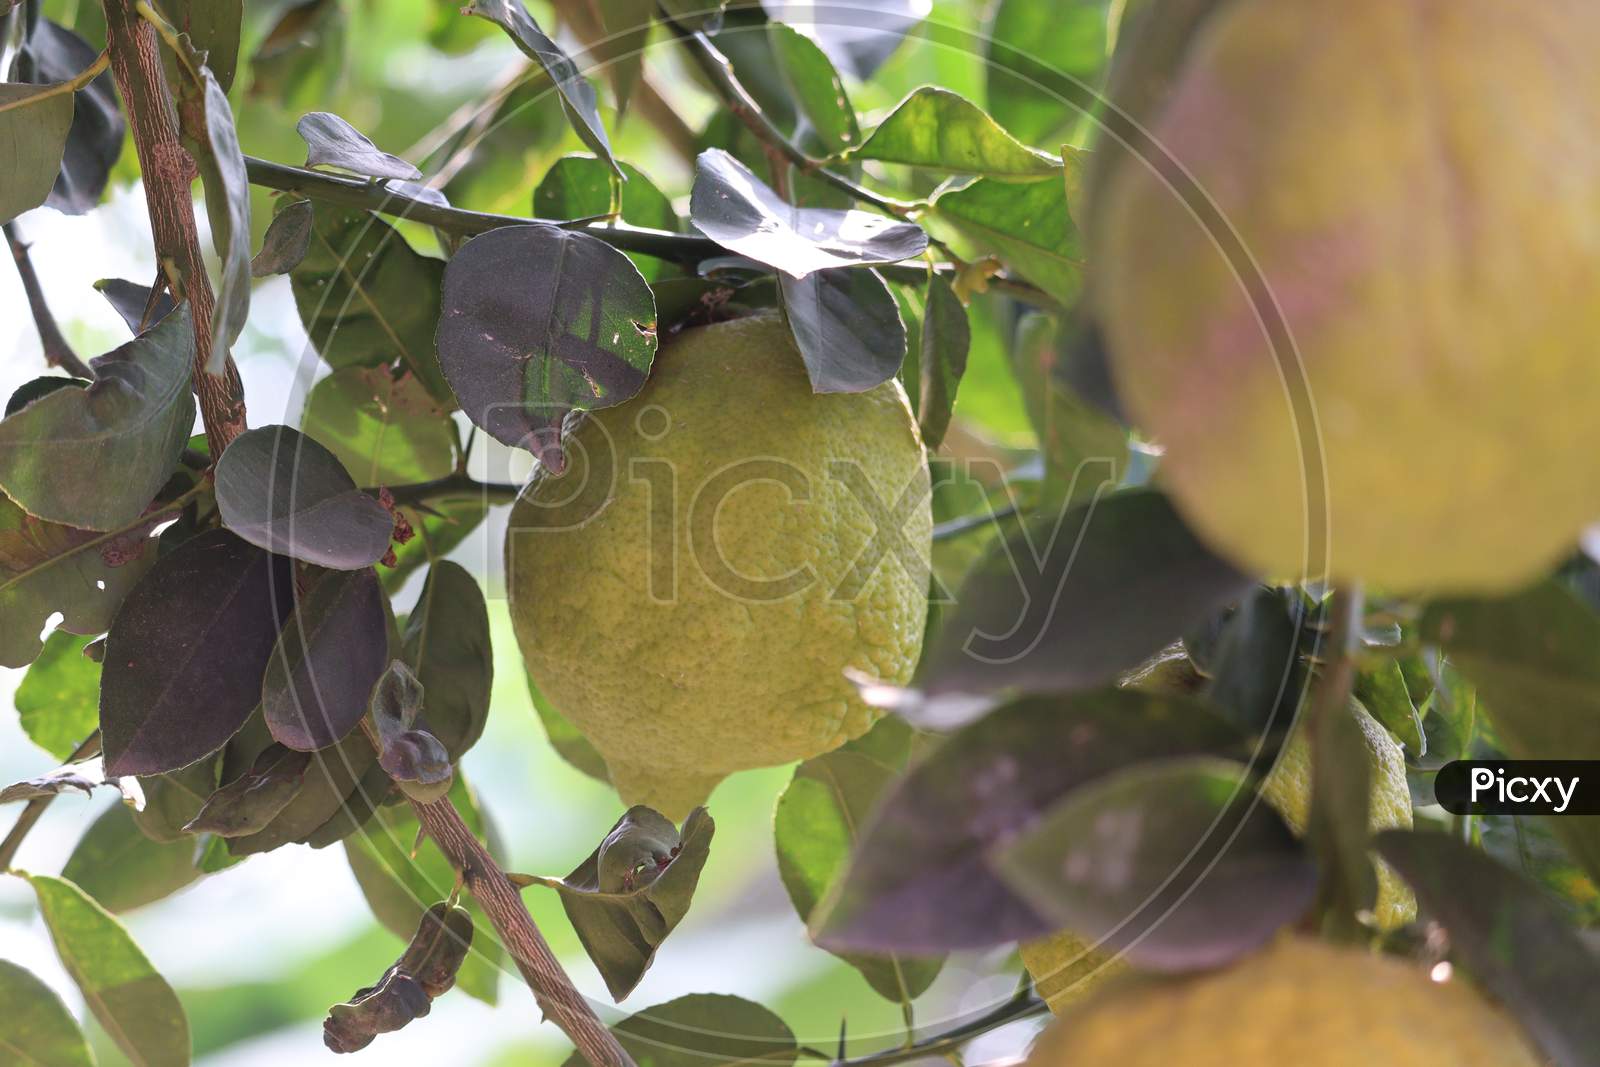 Yellow Lime Citrus Fruits On The Tree Branch